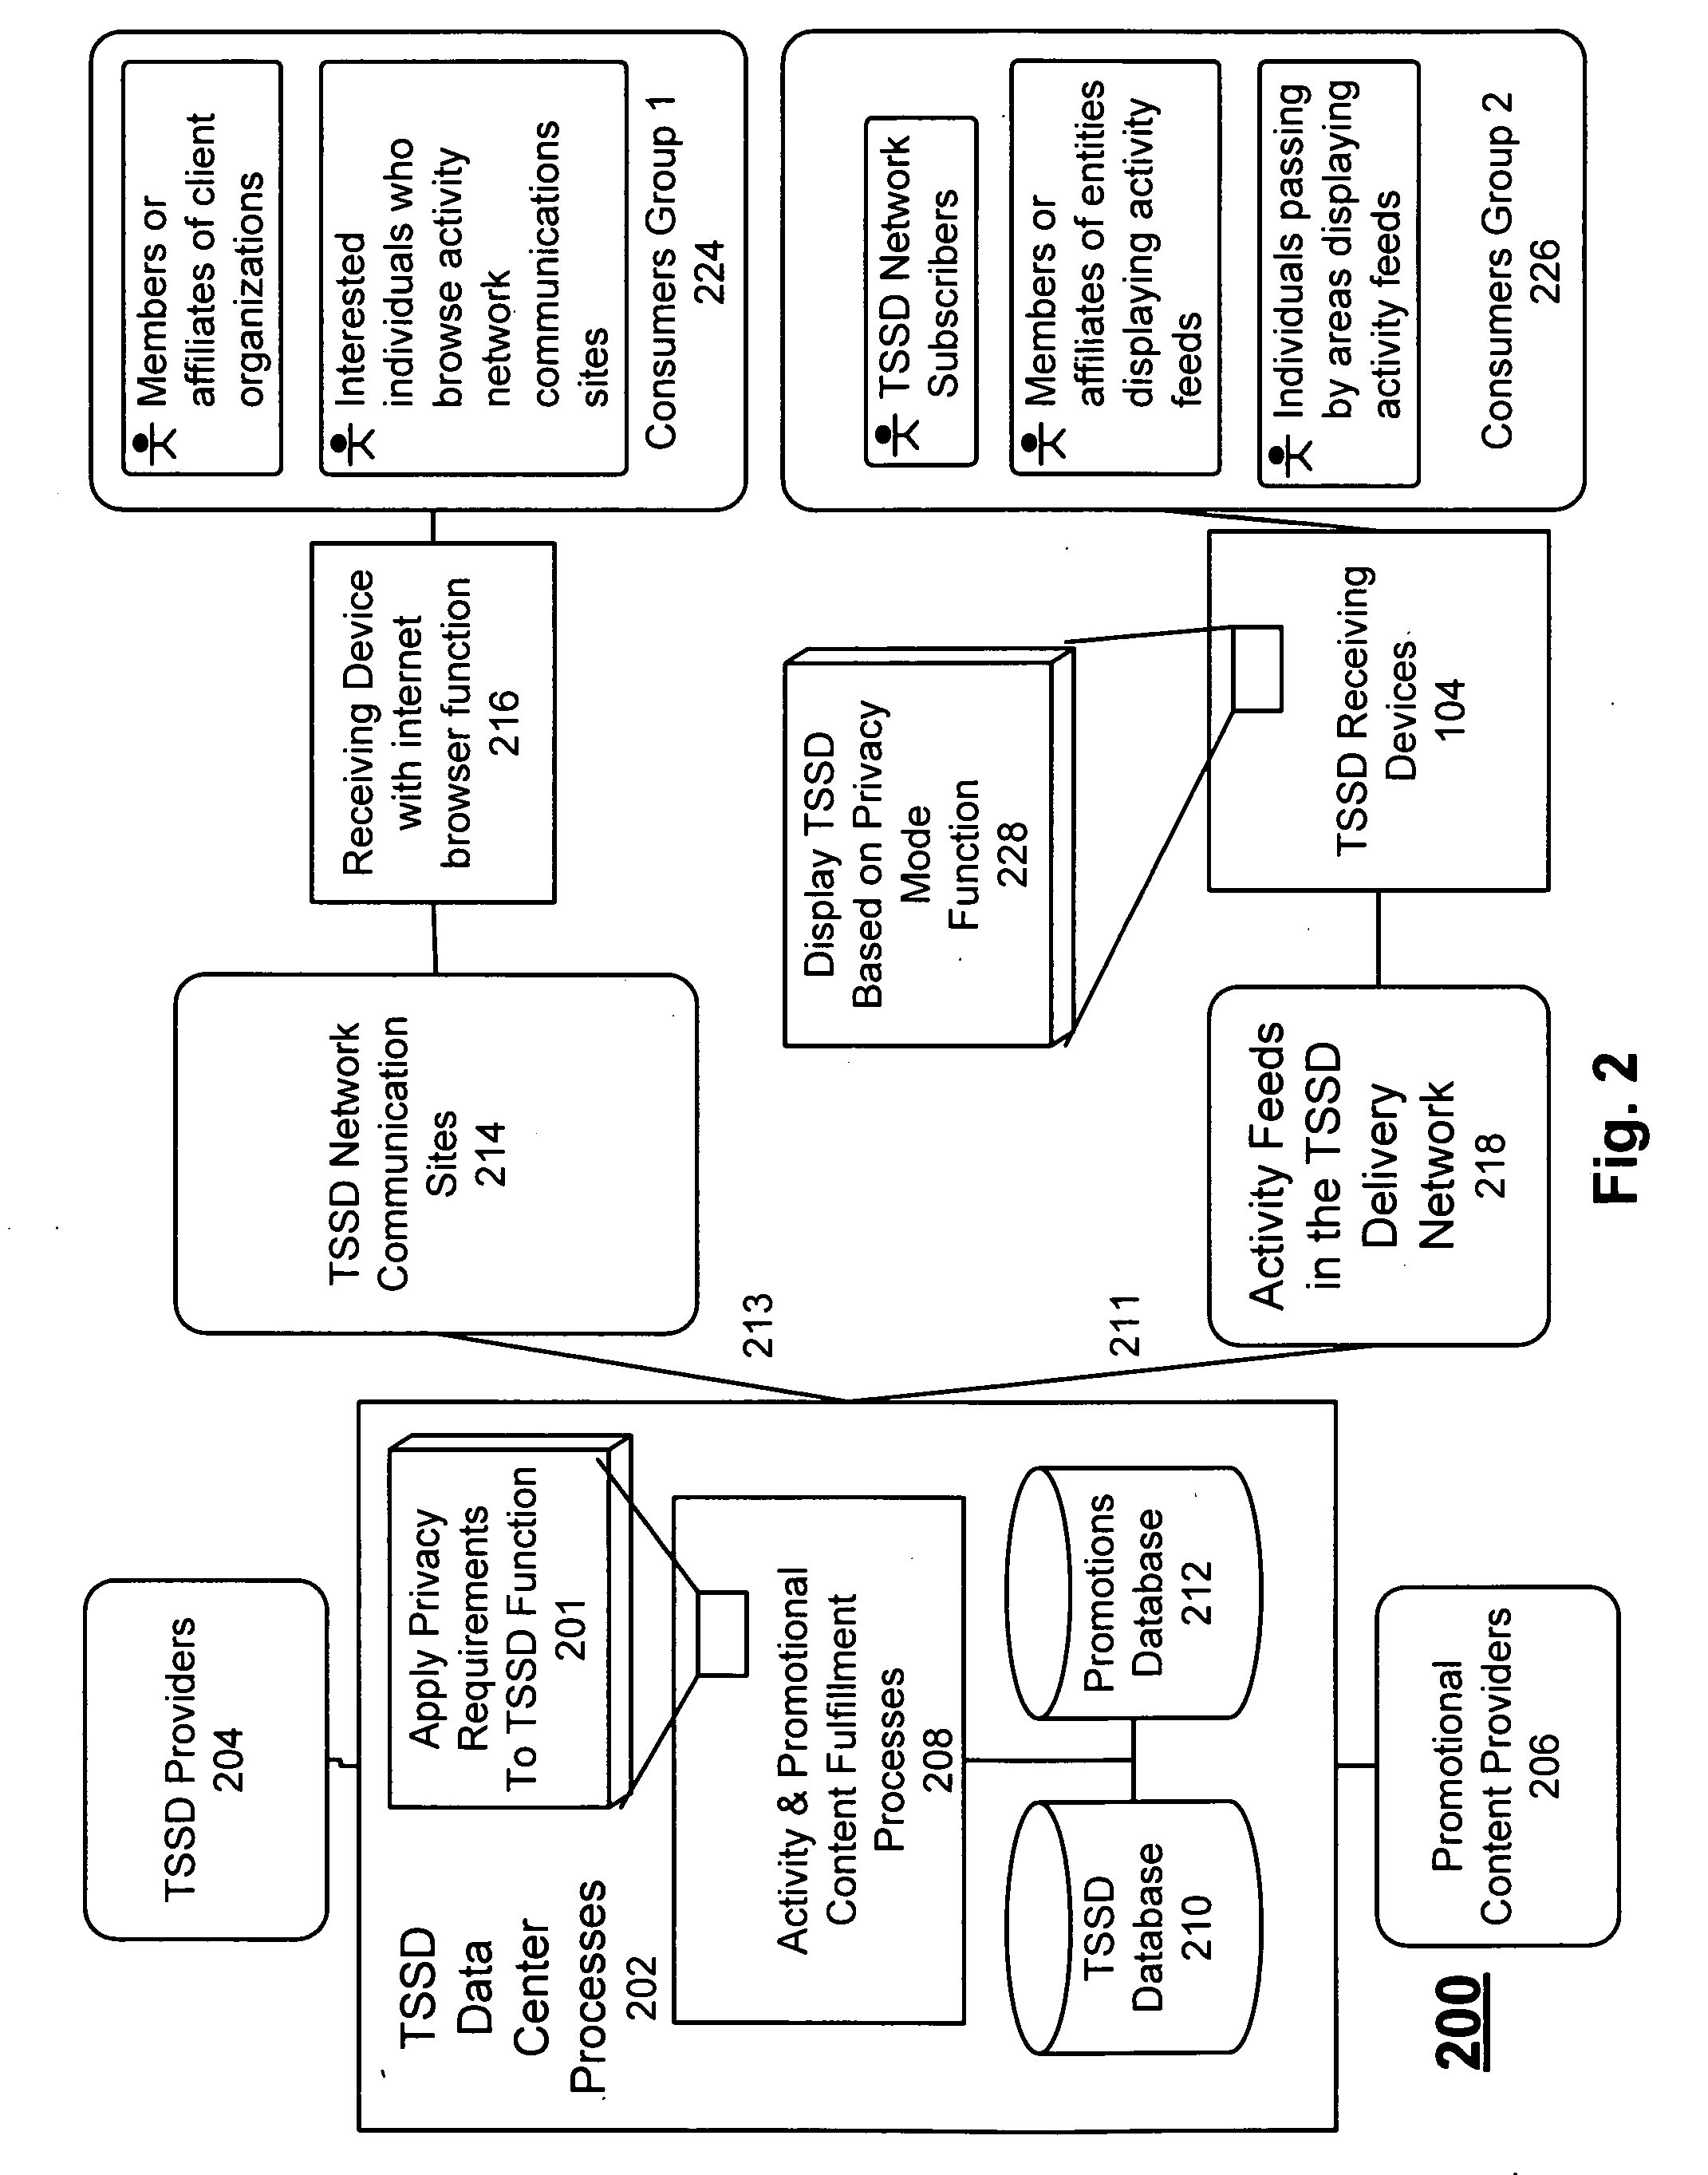 System and method for Time Sensitive Scheduling Data privacy protection